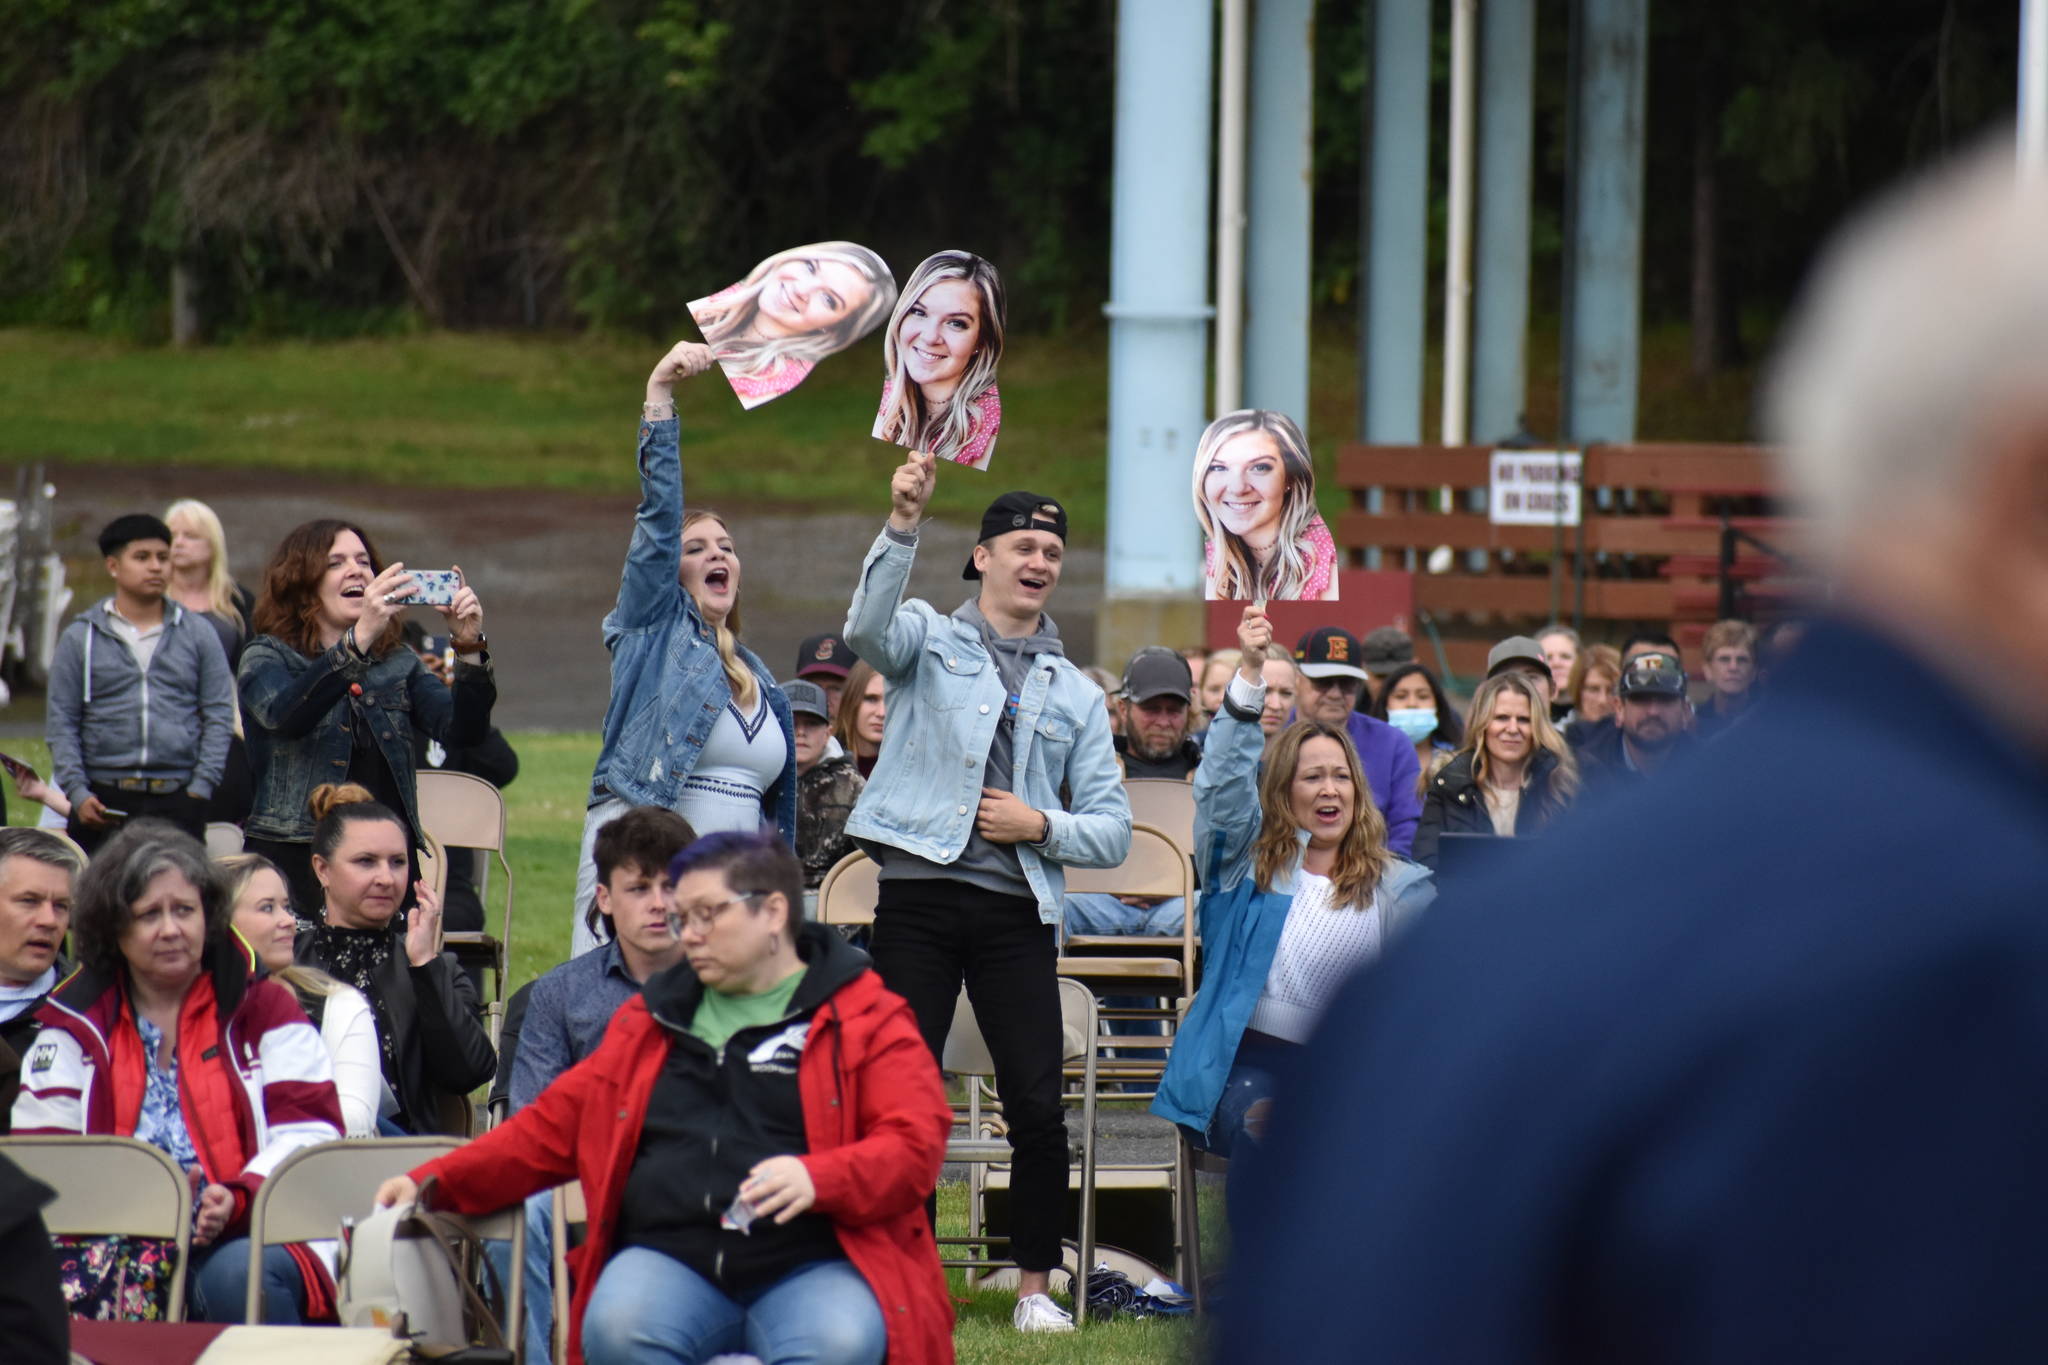 Photo by Alex Bruell 
Family and friends turned out in droves to cheer for graduating Enumclaw High School seniors.